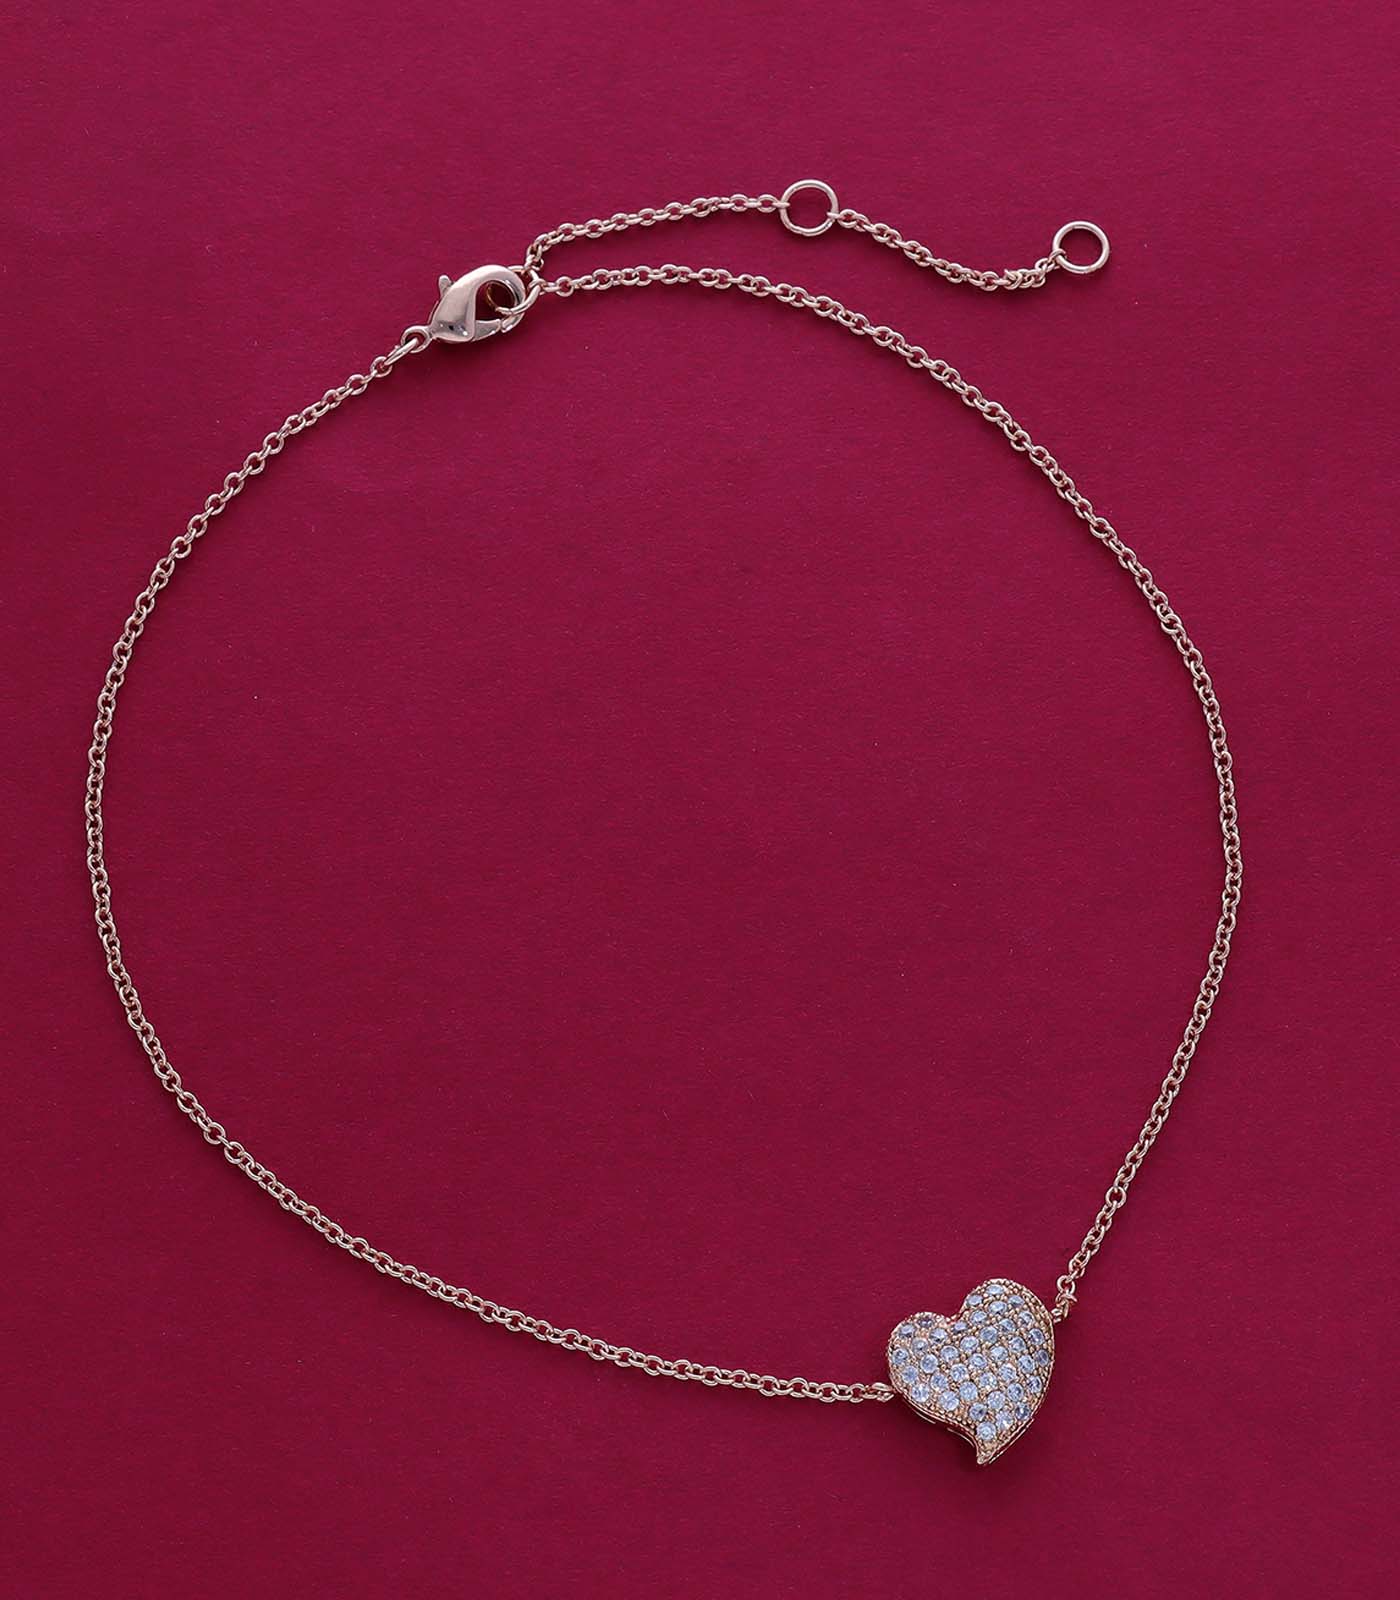 DAINTY HEART OF DESIRES ANKLET (BRASS)